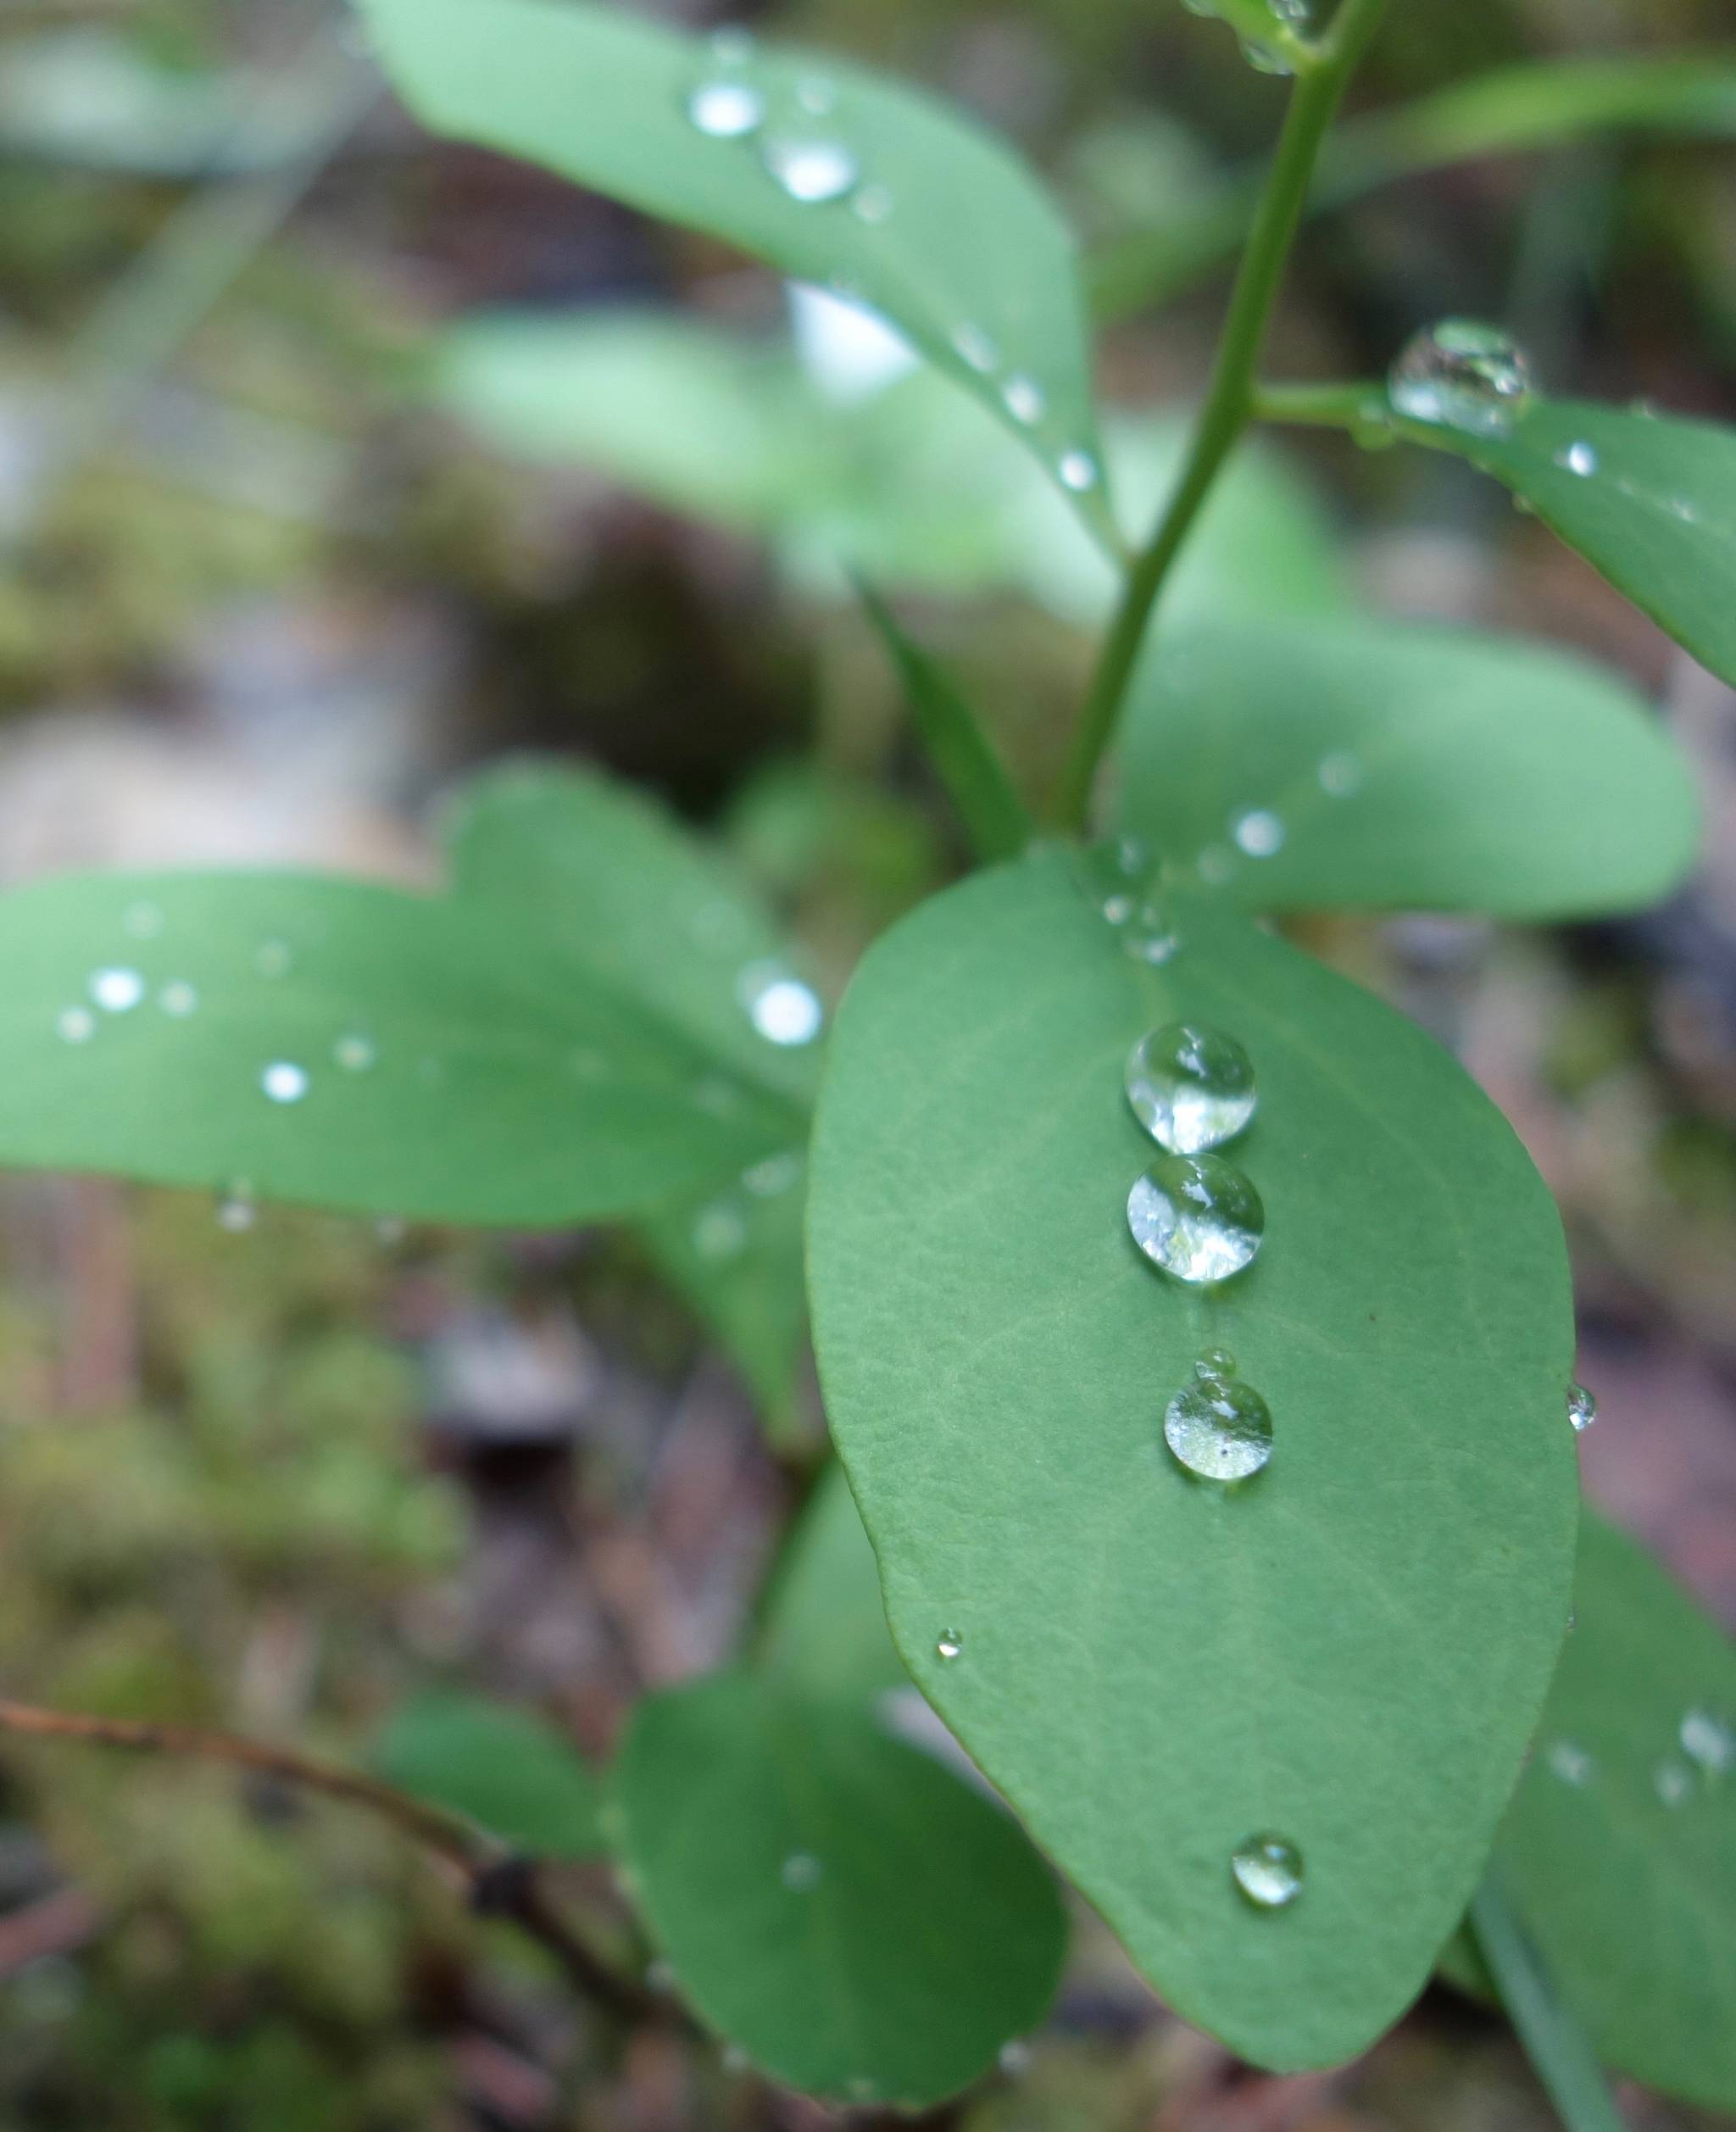 Water droplets sit on leaves following a rainy period in Interior Alaska. It’s been a rainy week in Alaska. (Courtesy Photo | Ned Rozell)